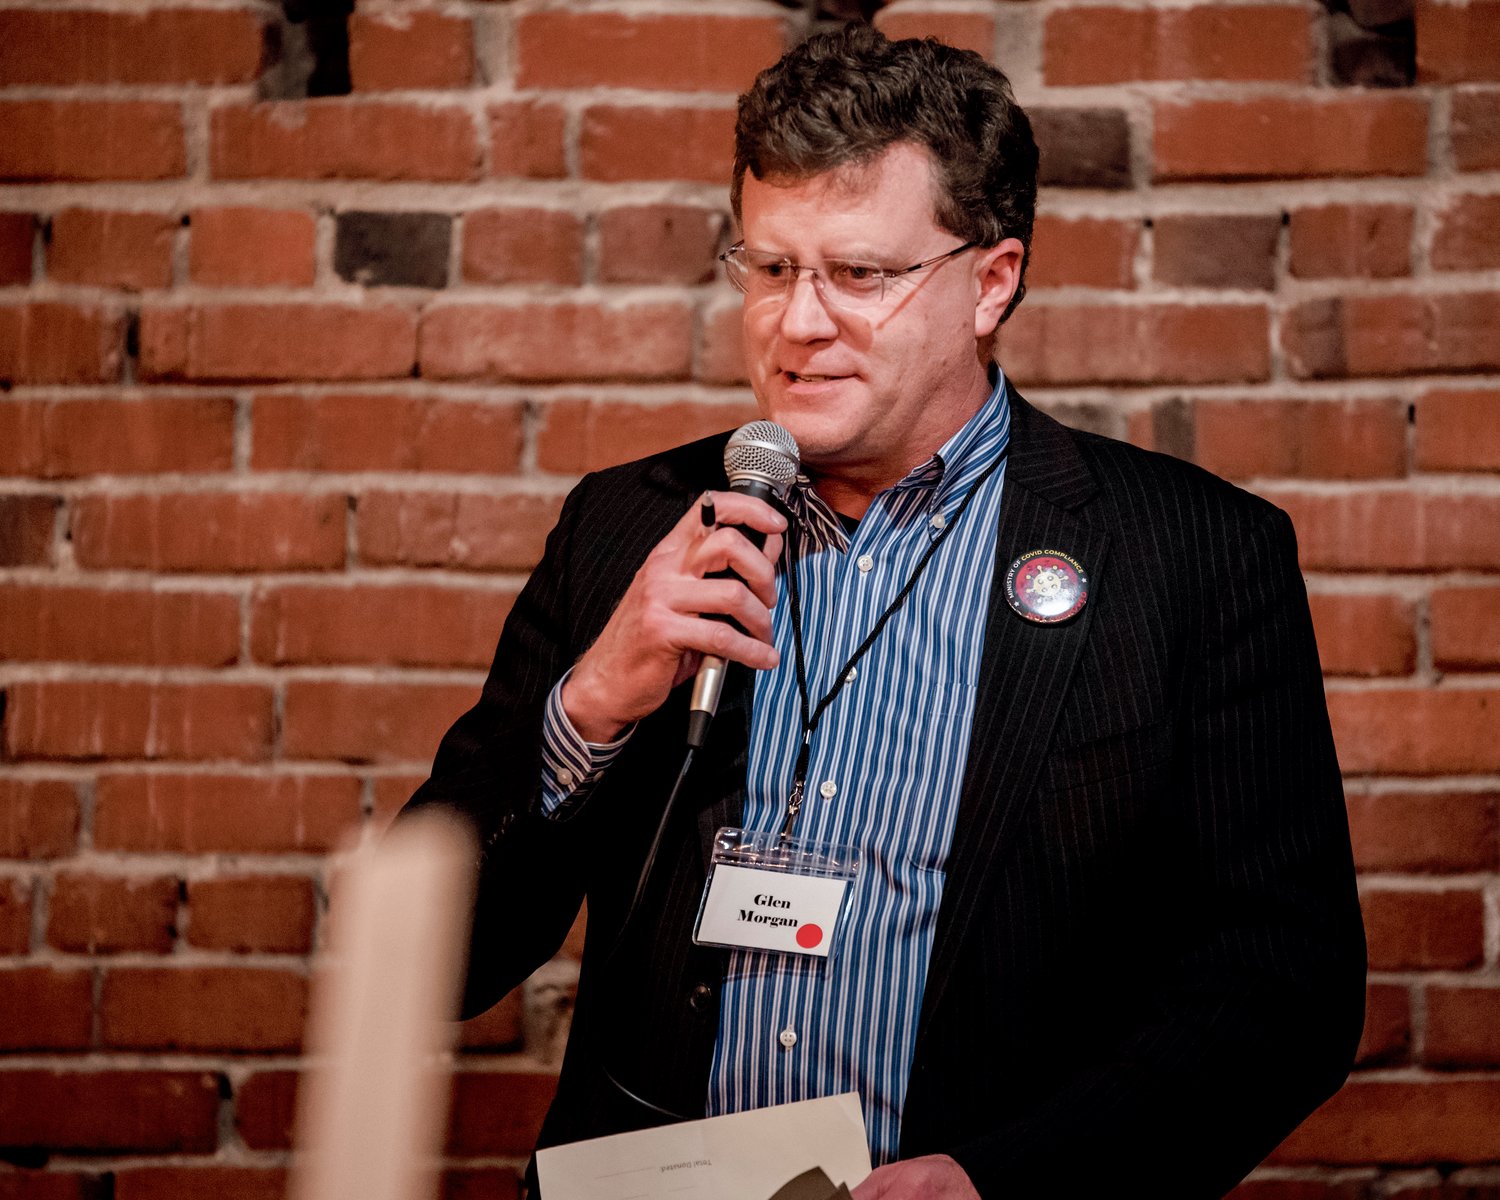 Glen Morgan uses a microphone to address attendees of the Lincoln Day Dinner in Chehalis in February 2022.